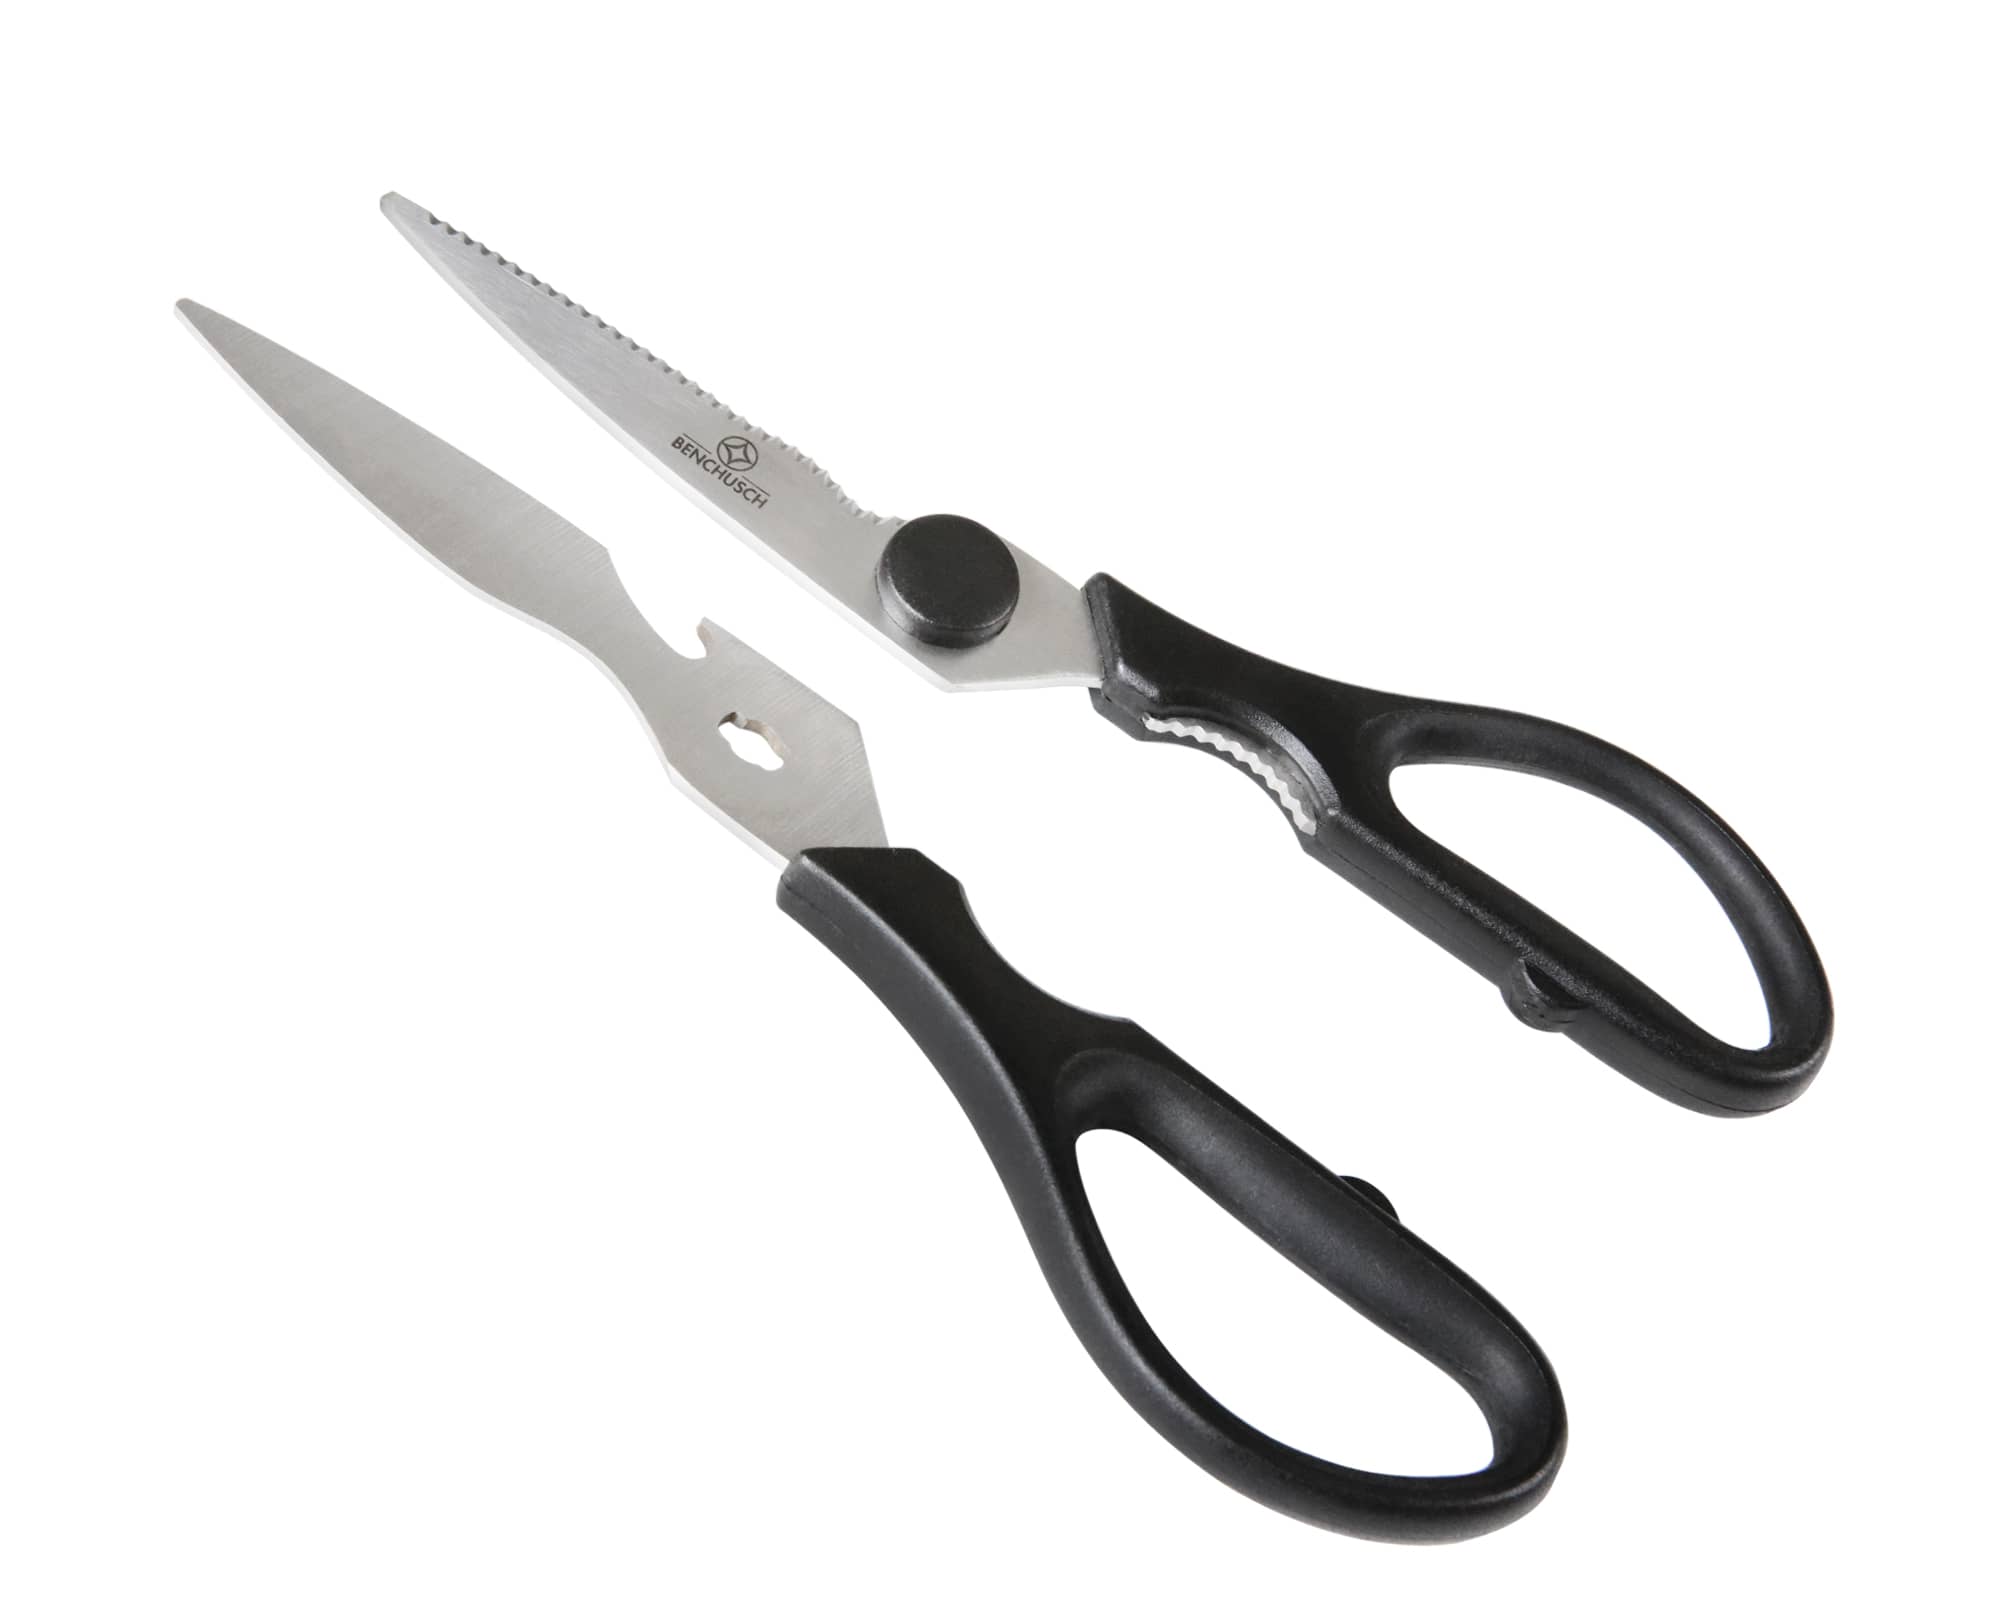 Classic 8-Inch Scissors with the unique design allow them to come apart for your convenient cleanup